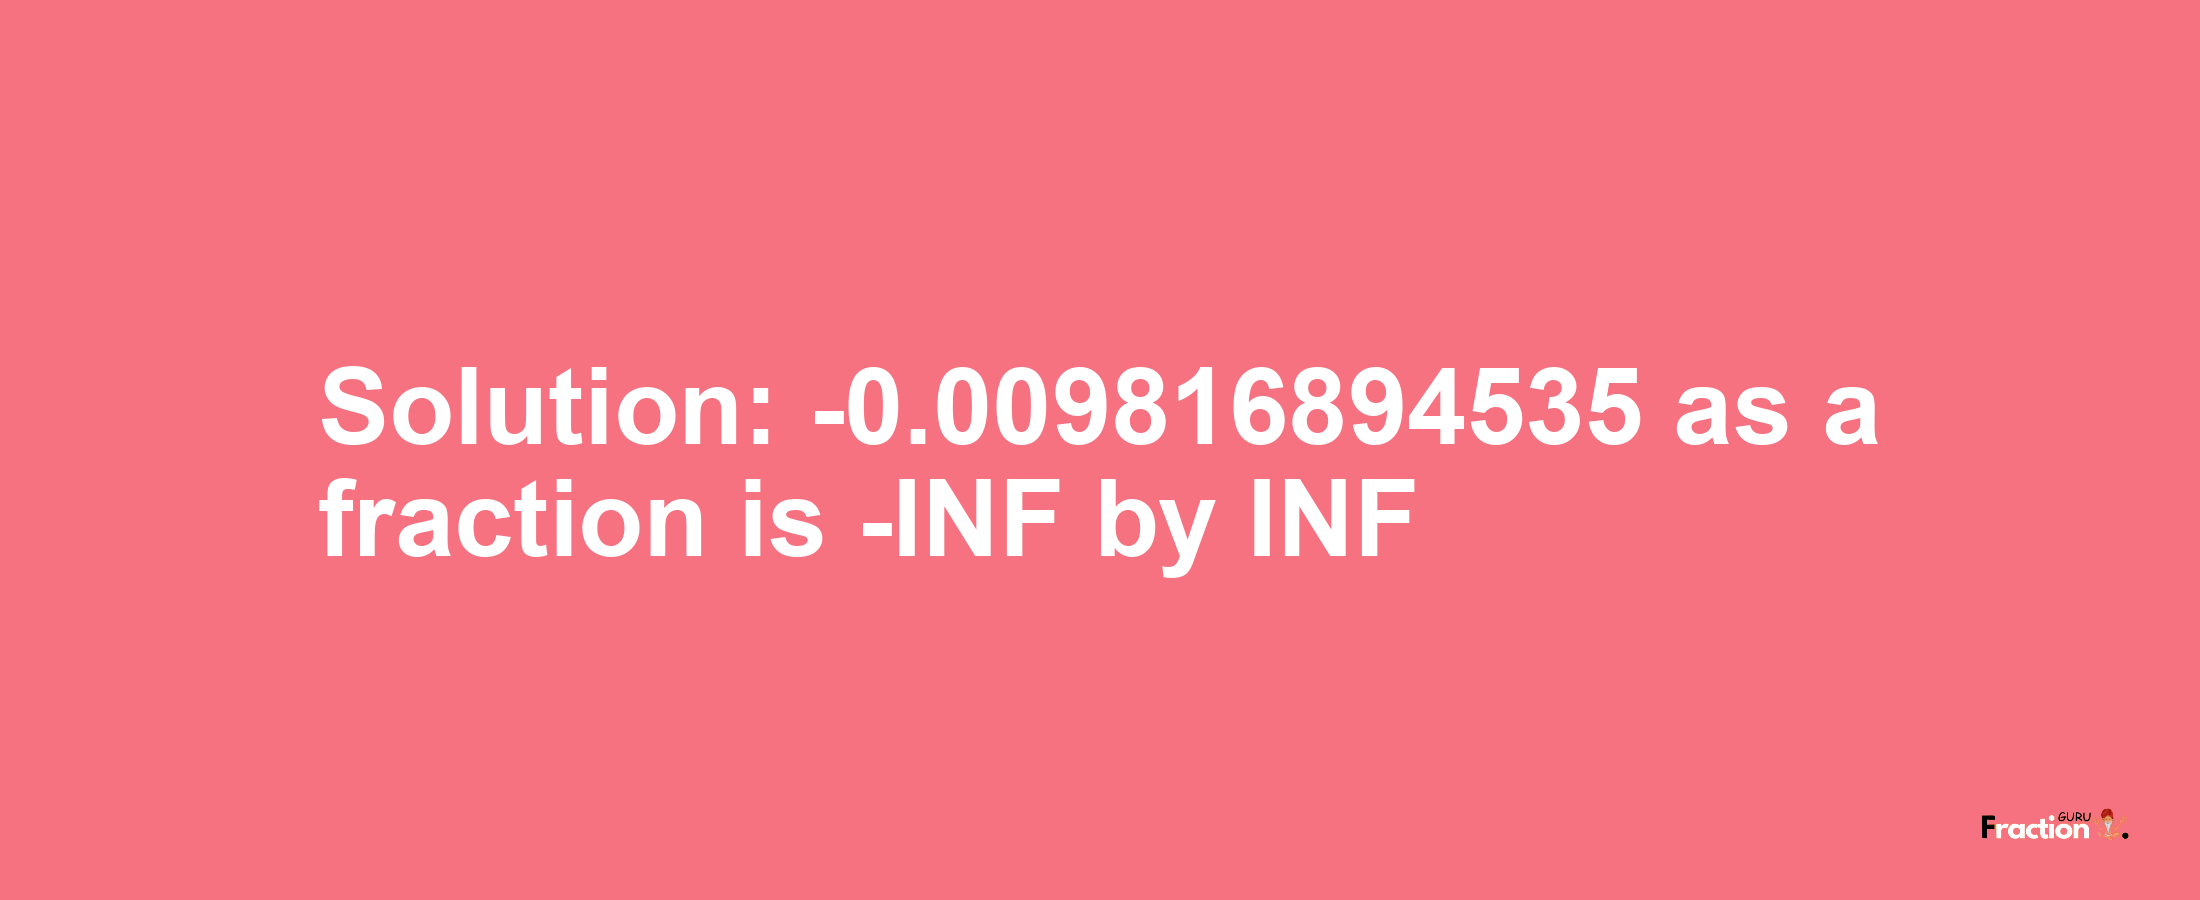 Solution:-0.009816894535 as a fraction is -INF/INF